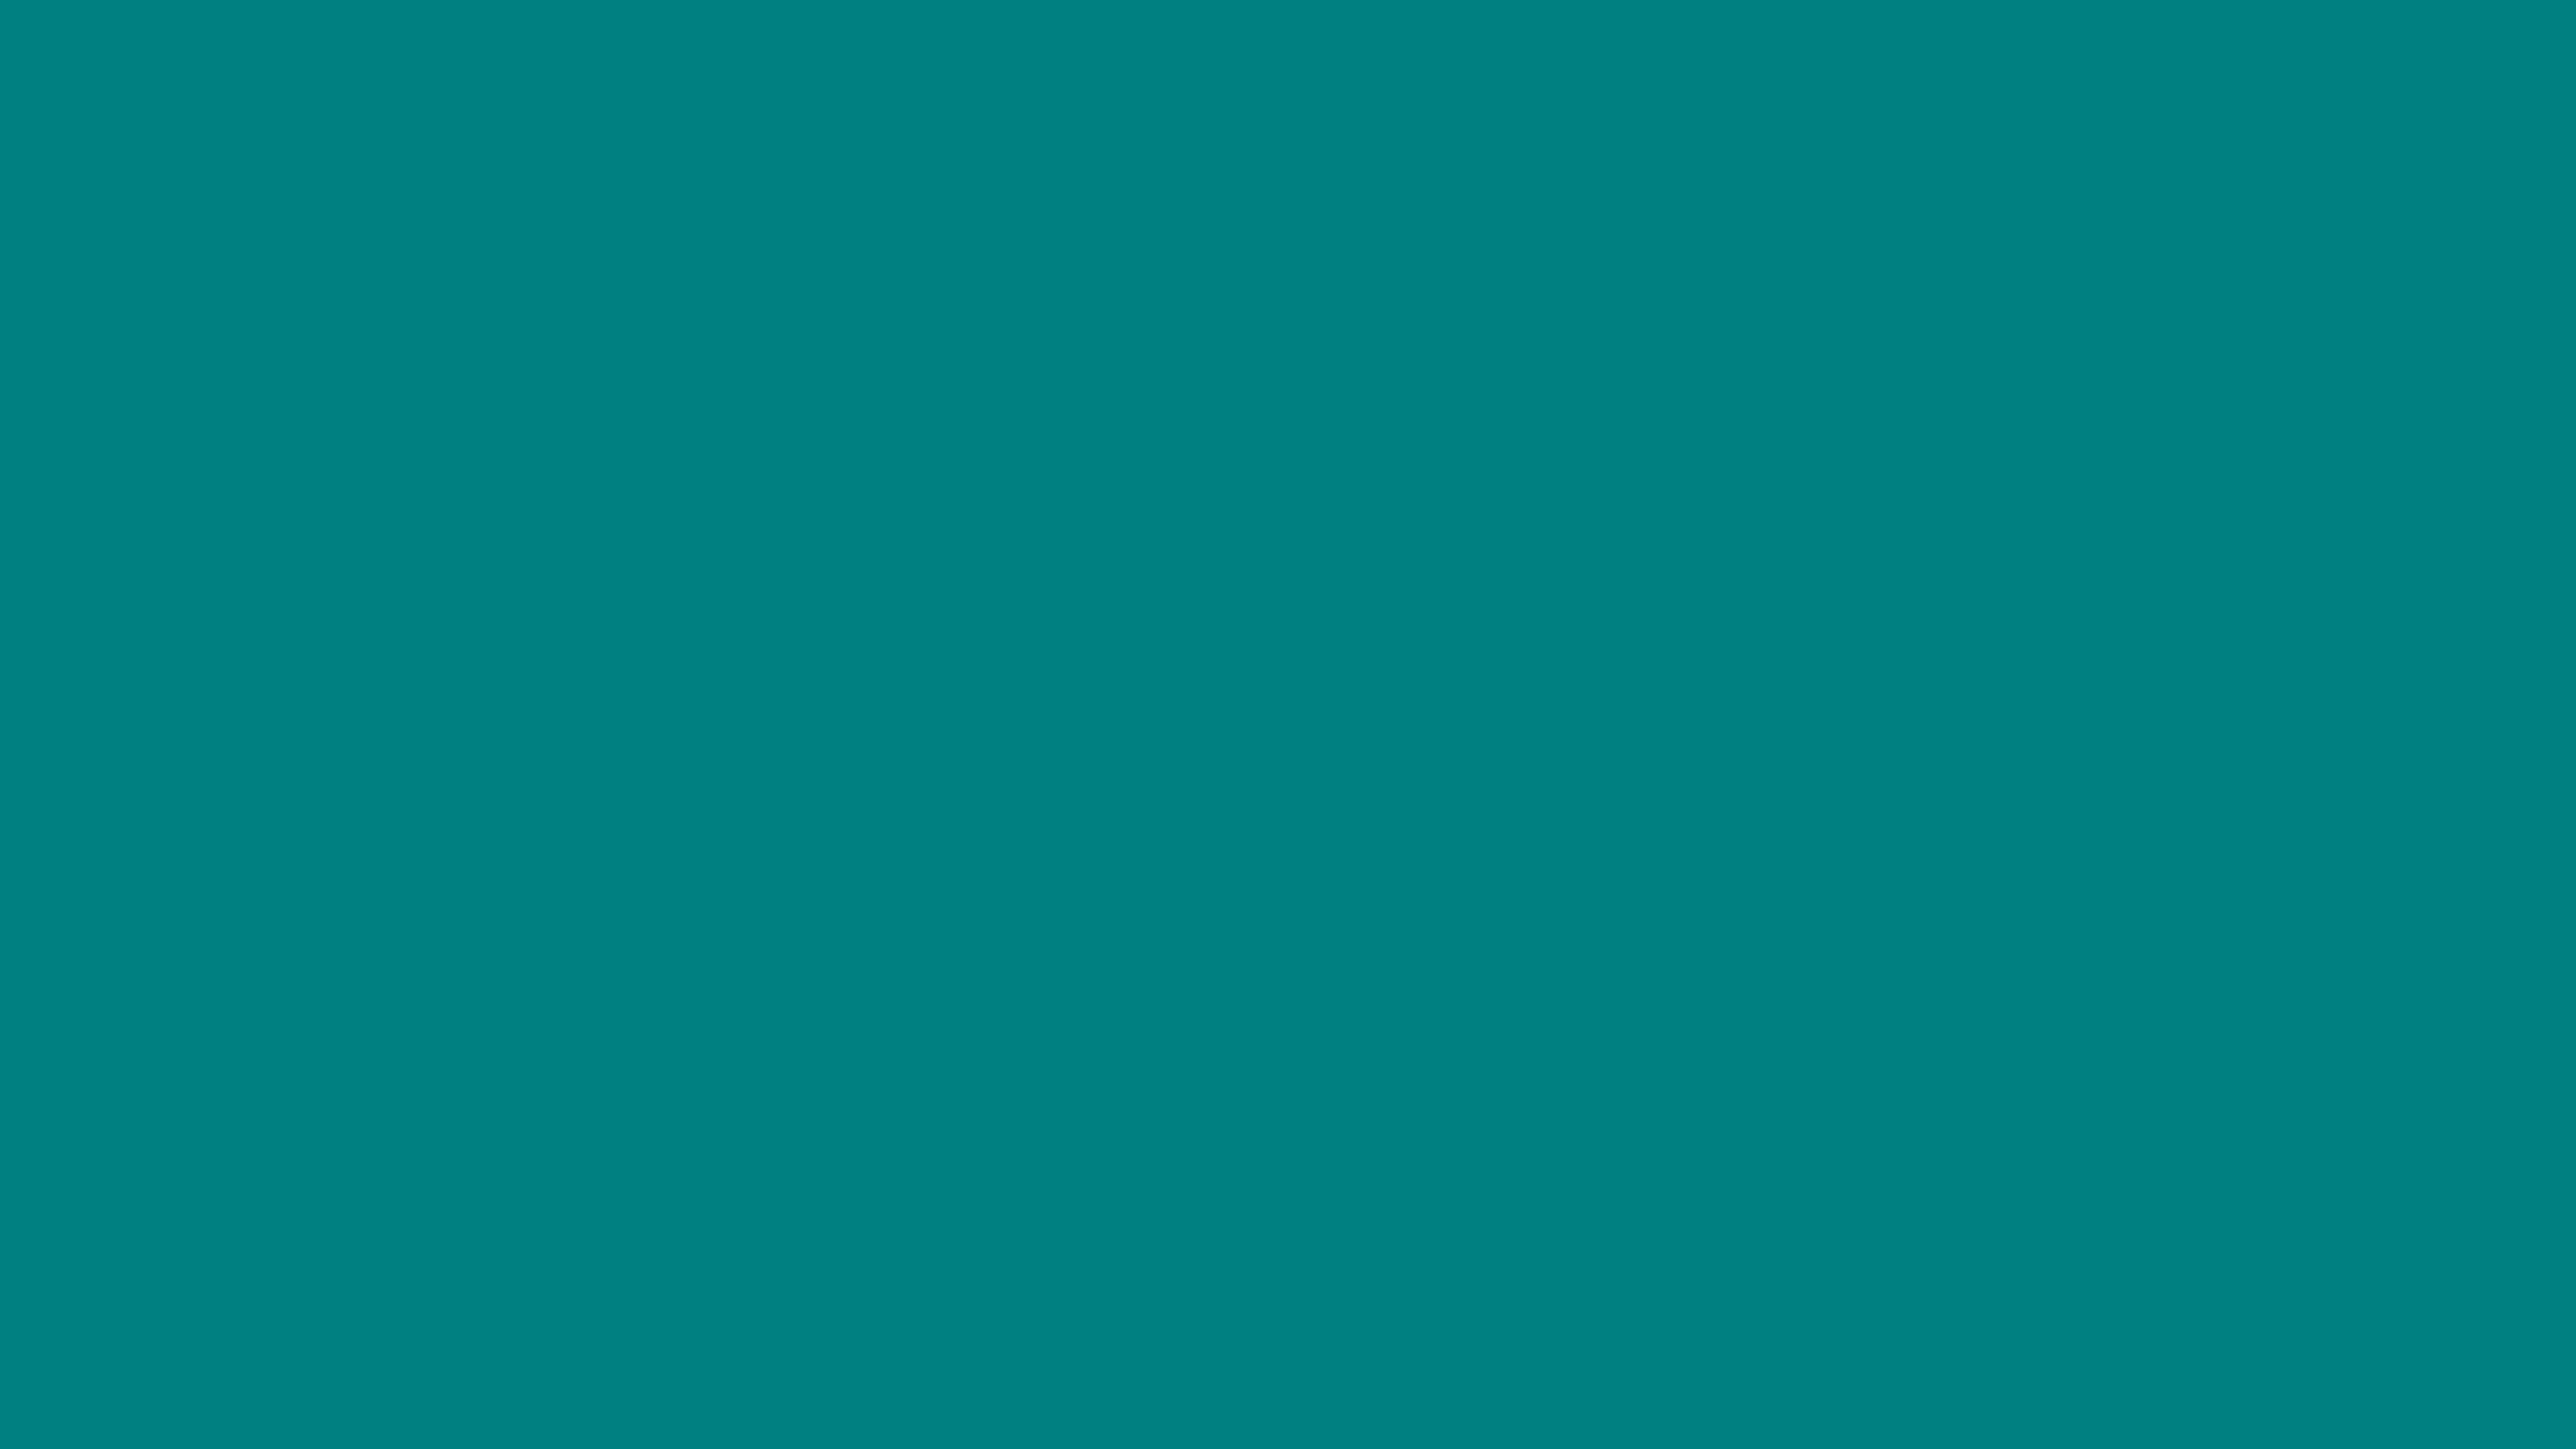 3840x2160 Teal Solid Color Background